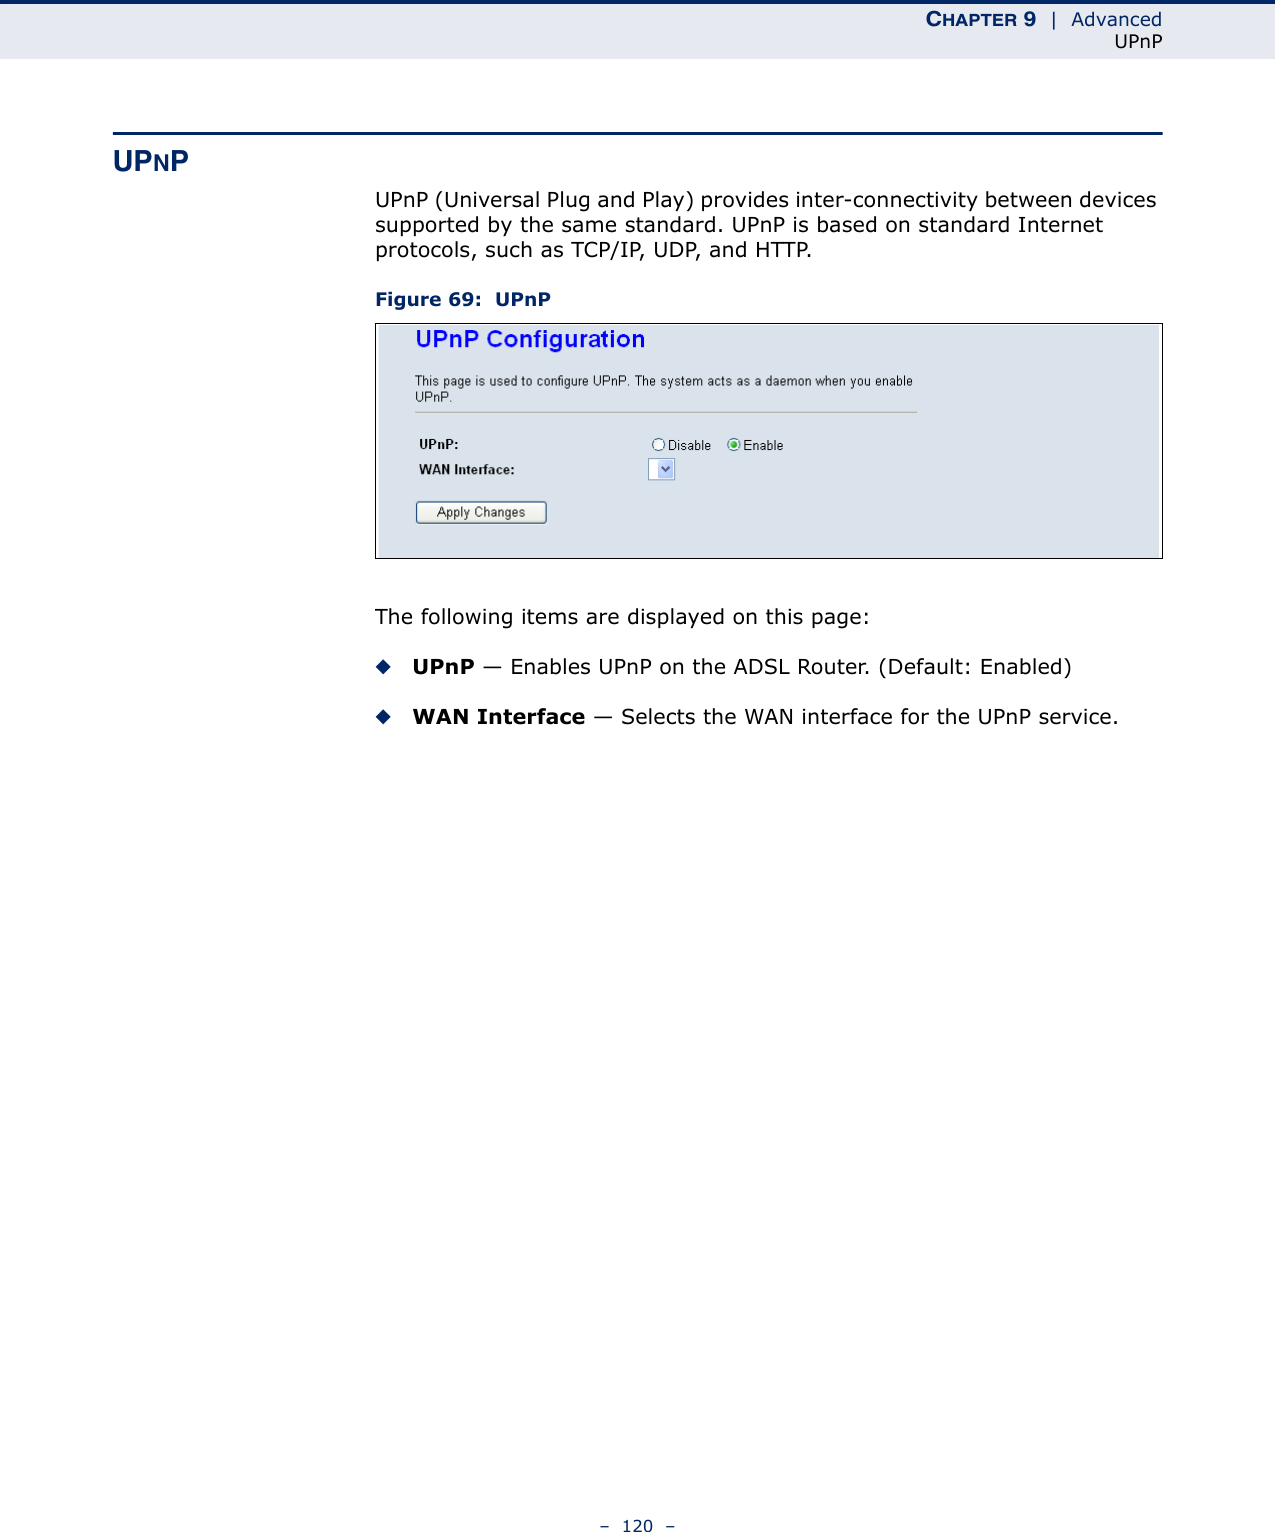 CHAPTER 9  |  AdvancedUPnP–  120  –UPNPUPnP (Universal Plug and Play) provides inter-connectivity between devices supported by the same standard. UPnP is based on standard Internet protocols, such as TCP/IP, UDP, and HTTP.Figure 69:  UPnPThe following items are displayed on this page:◆UPnP — Enables UPnP on the ADSL Router. (Default: Enabled)◆WAN Interface — Selects the WAN interface for the UPnP service.